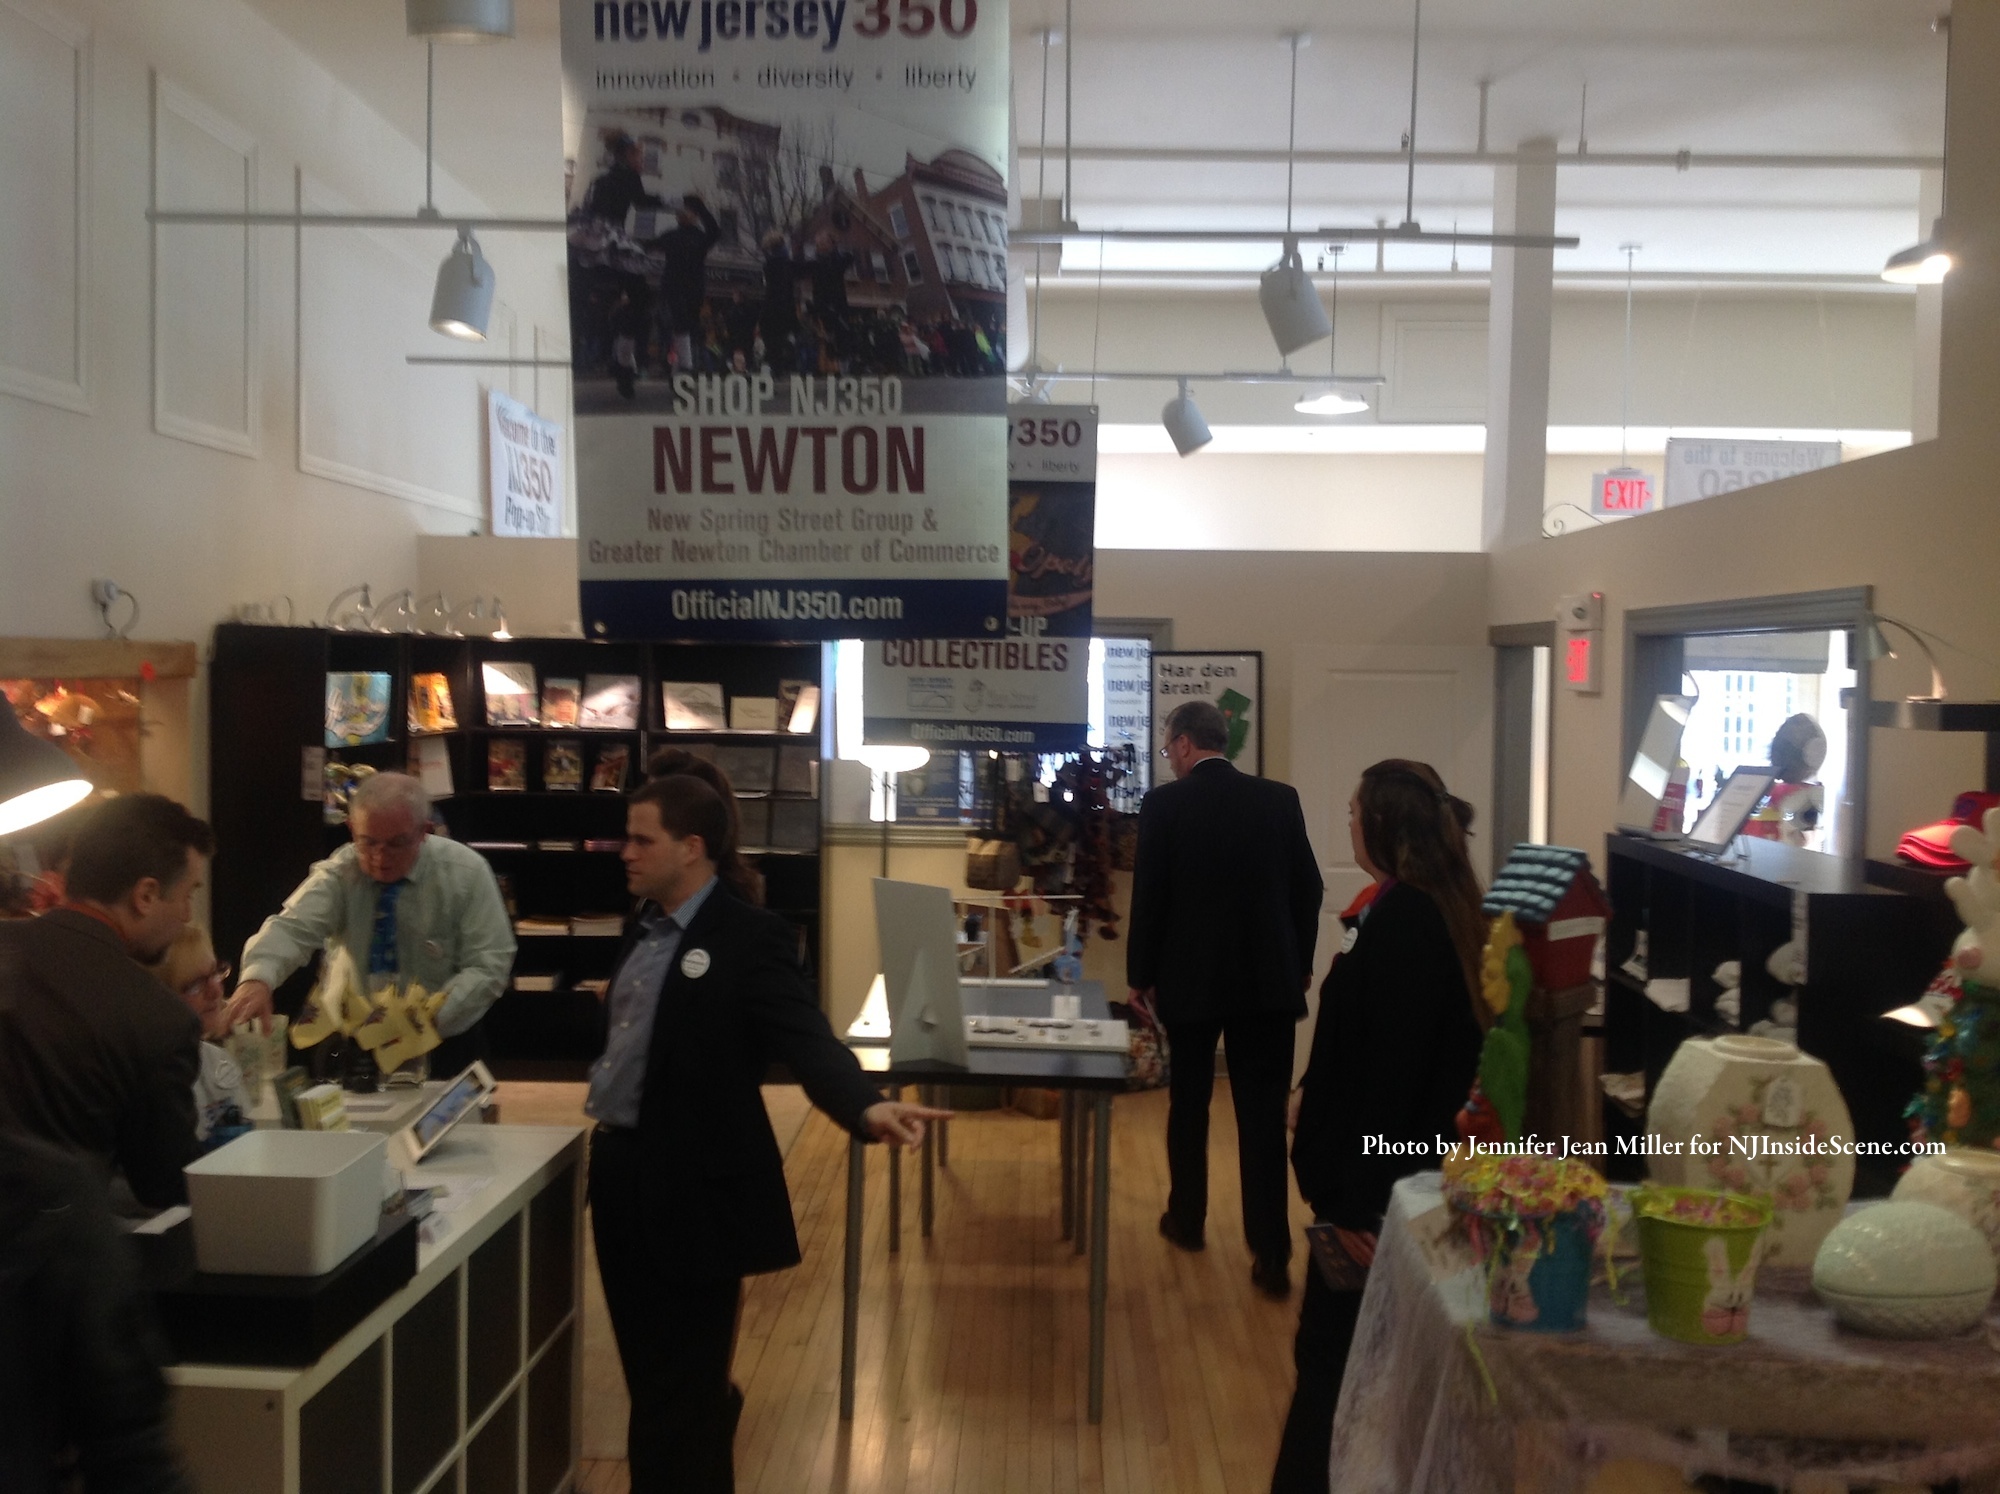 The NJ350 Pop-Up Store inside of the Springboard Shoppes.